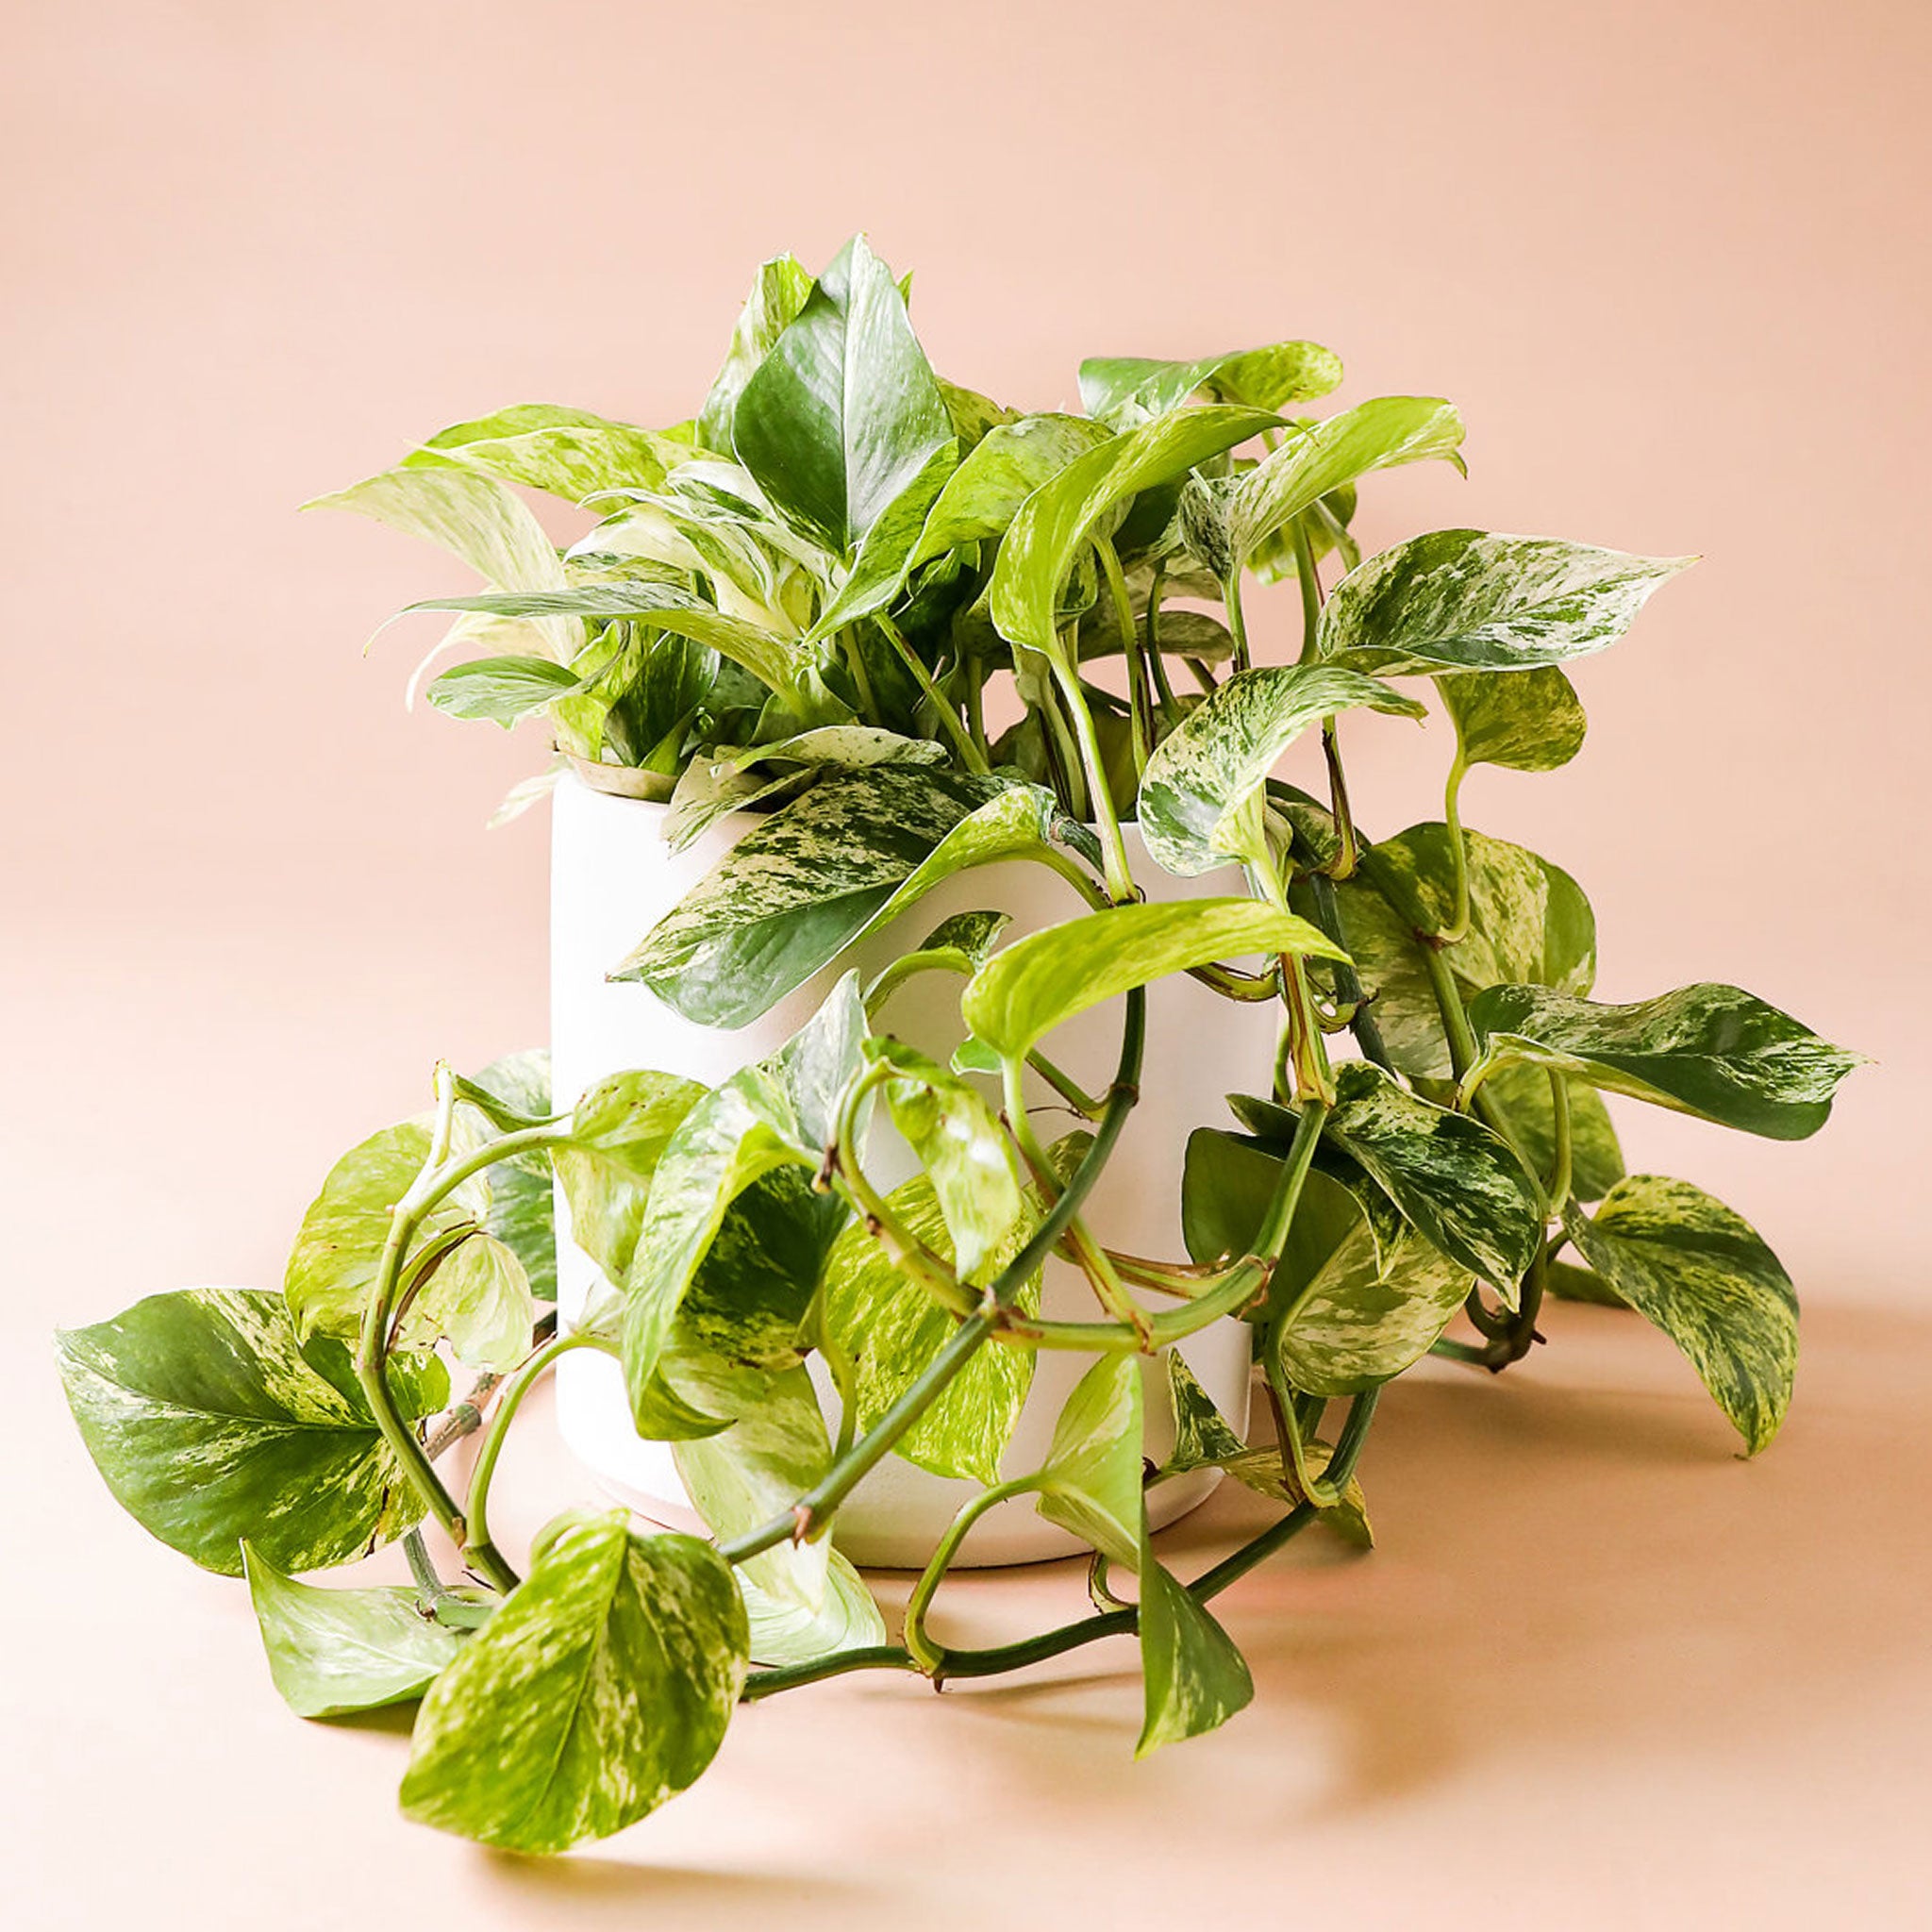 In front of a pink background is a white cylinder pot with a marble queen pothos inside. The plant has long green vines that fall down the side of the pot. The leaves are yellow and green variegated.